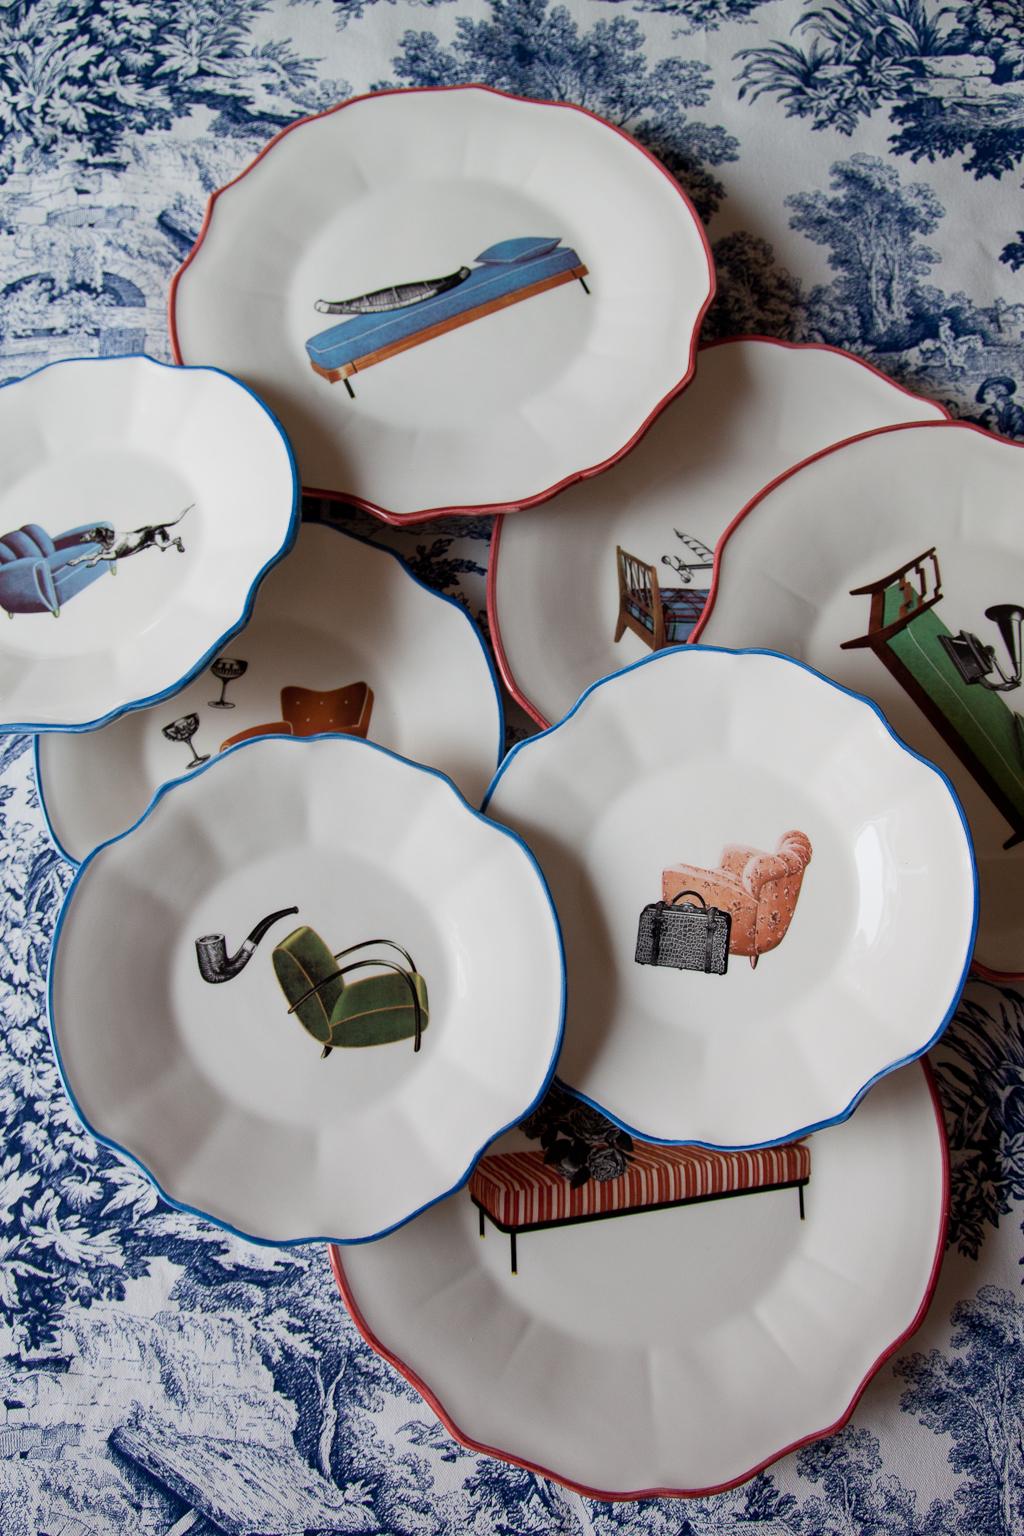 This set of 4 dinner plates + 4 dessert plates are dedicated to dreams made while sleeping or daydreaming that happens at any time, better if we are nestled in a comfortable armchair.
Every dream is a gift, an opportunity to focus and temporarily